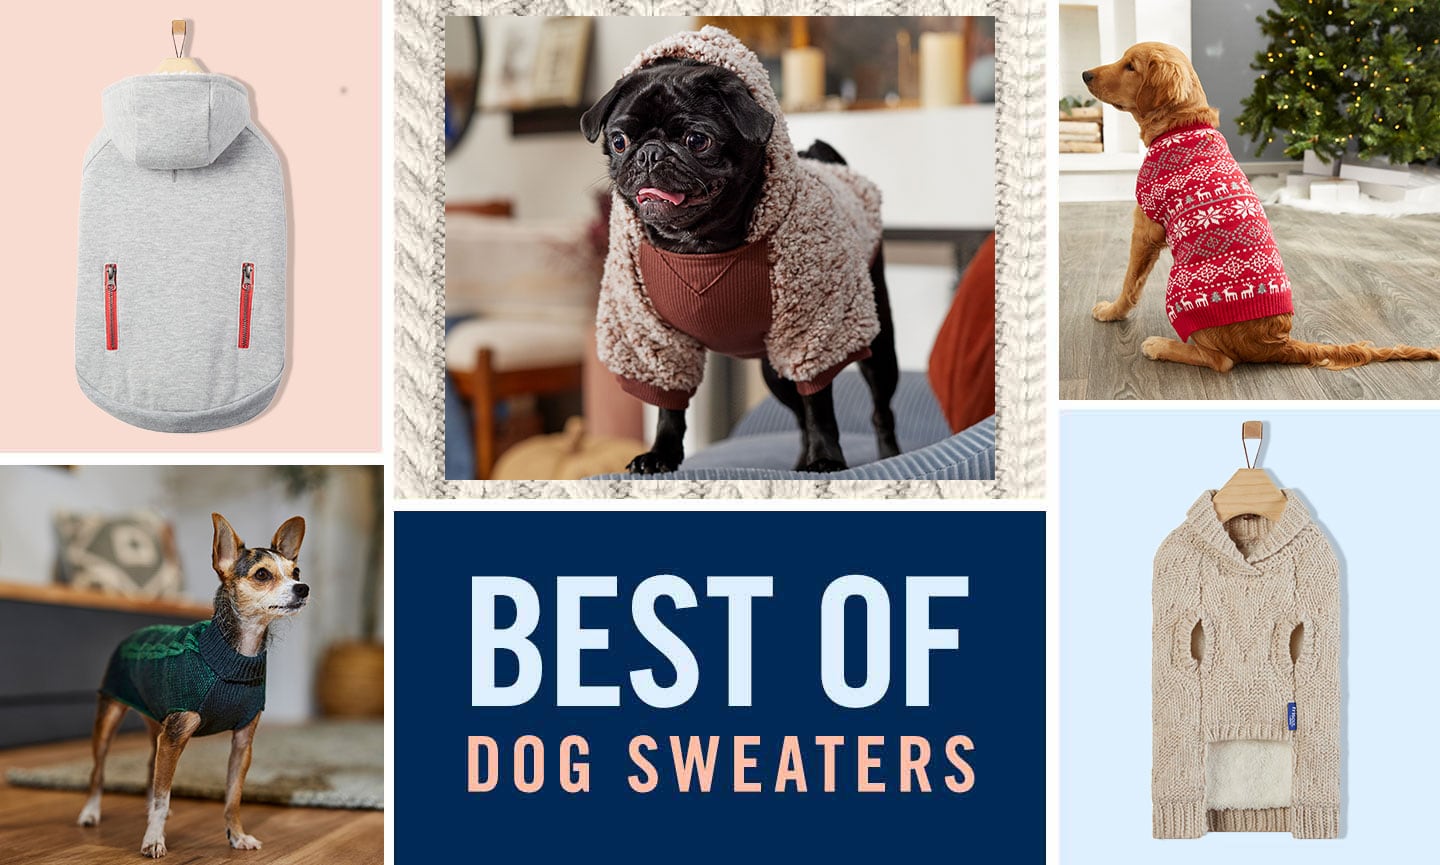 15 Cute Dog Sweaters 2021 - Best Sweaters for Small & Large Dogs